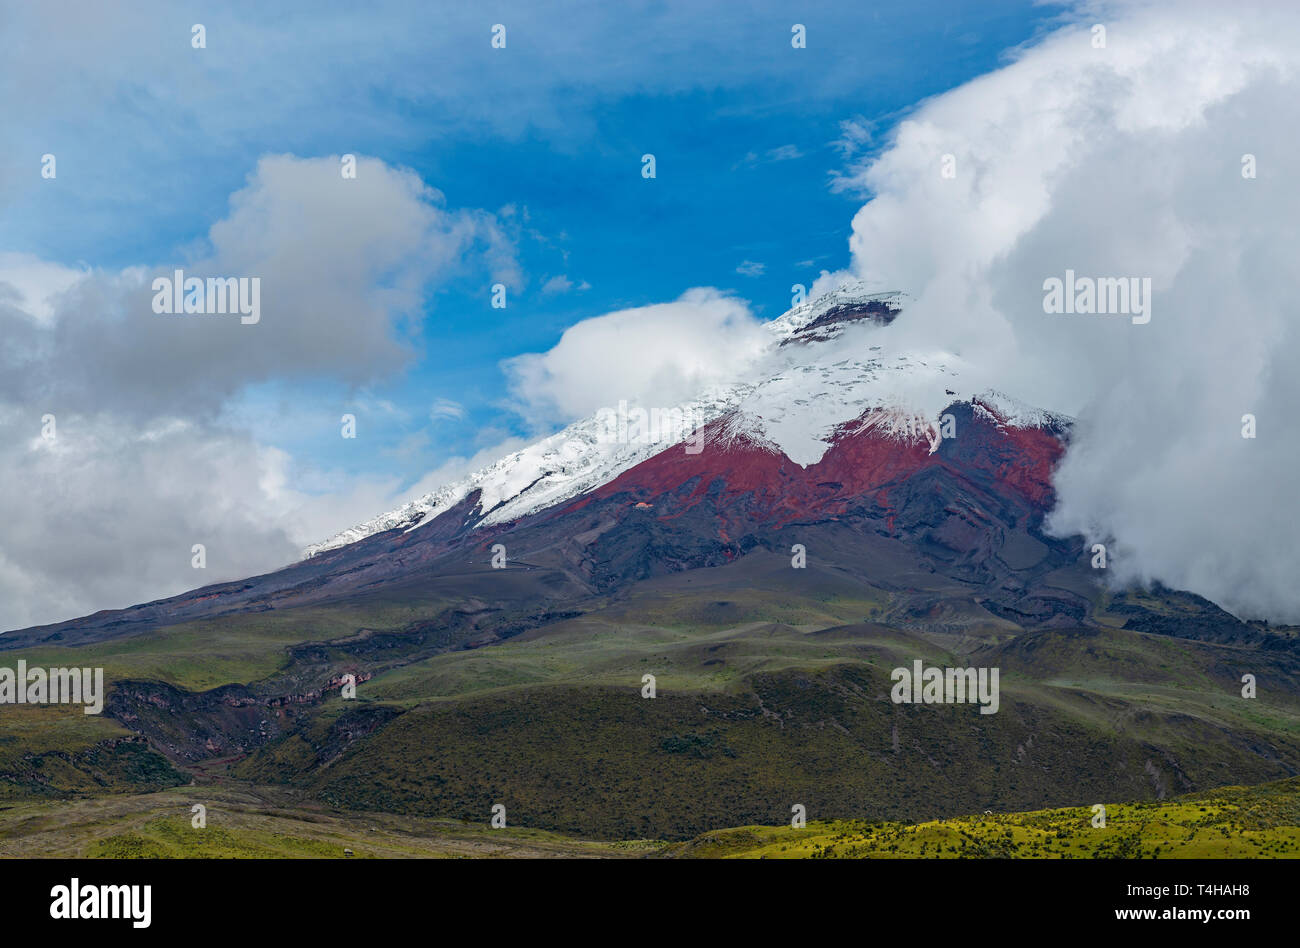 The majestic Cotopaxi volcano rising out of the Paramo high altitude ecosystem at 5897m high near the city of Quito, Ecuador. Stock Photo